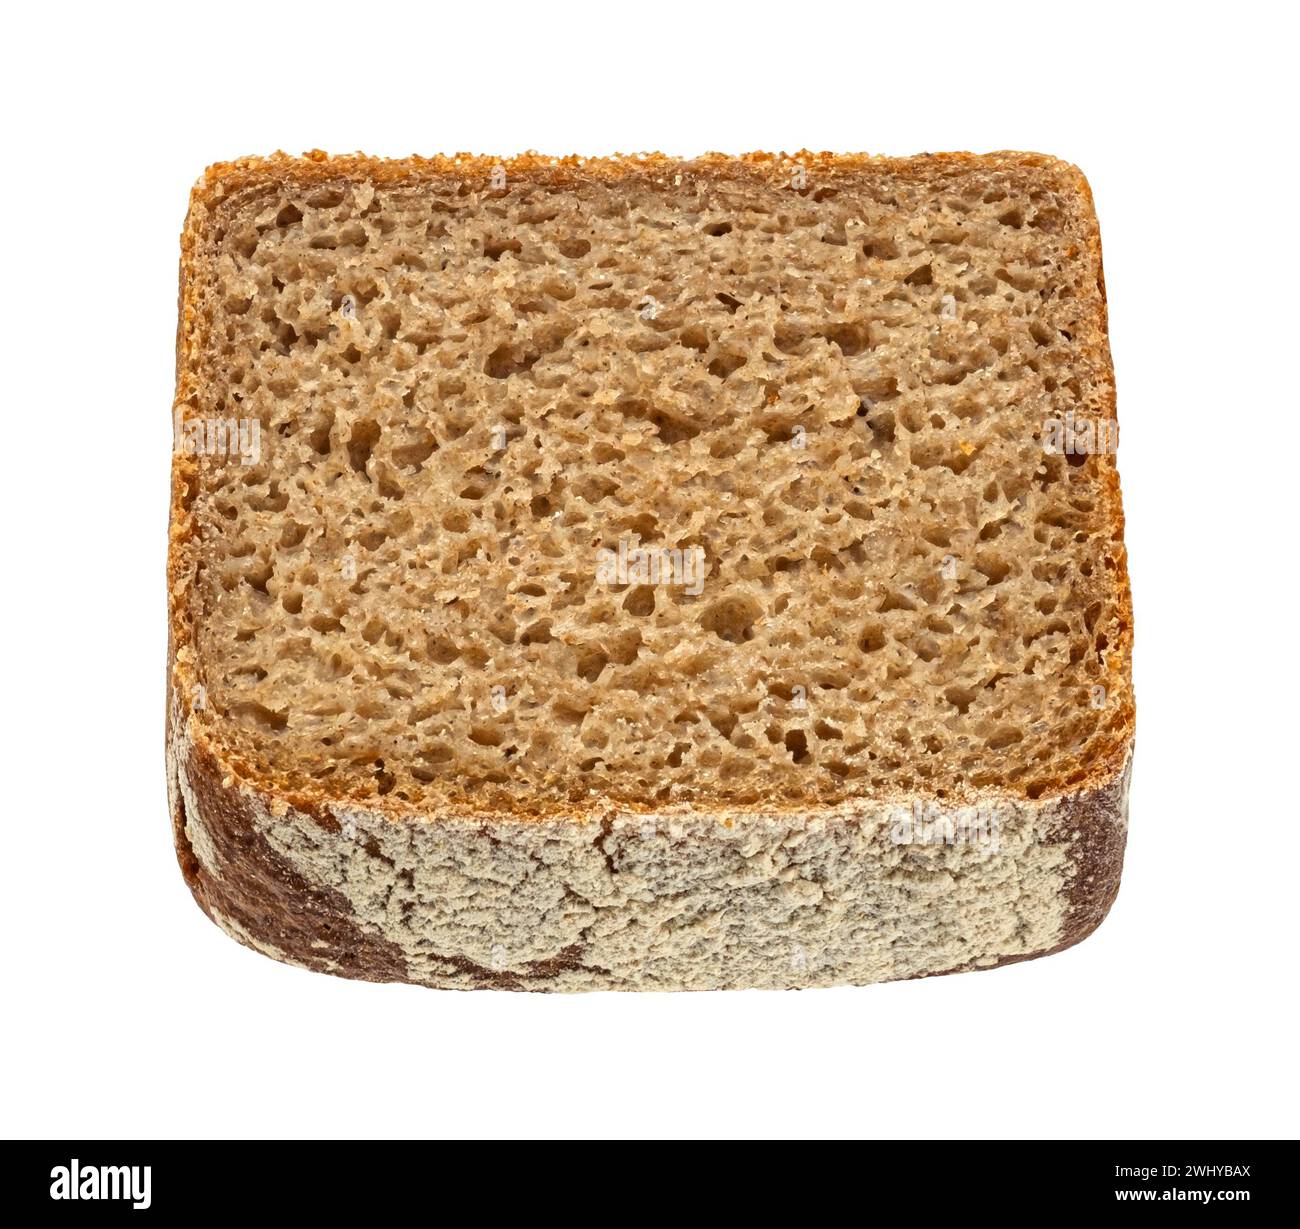 Rye bread slice isolated on white background, full depth of field Stock Photo